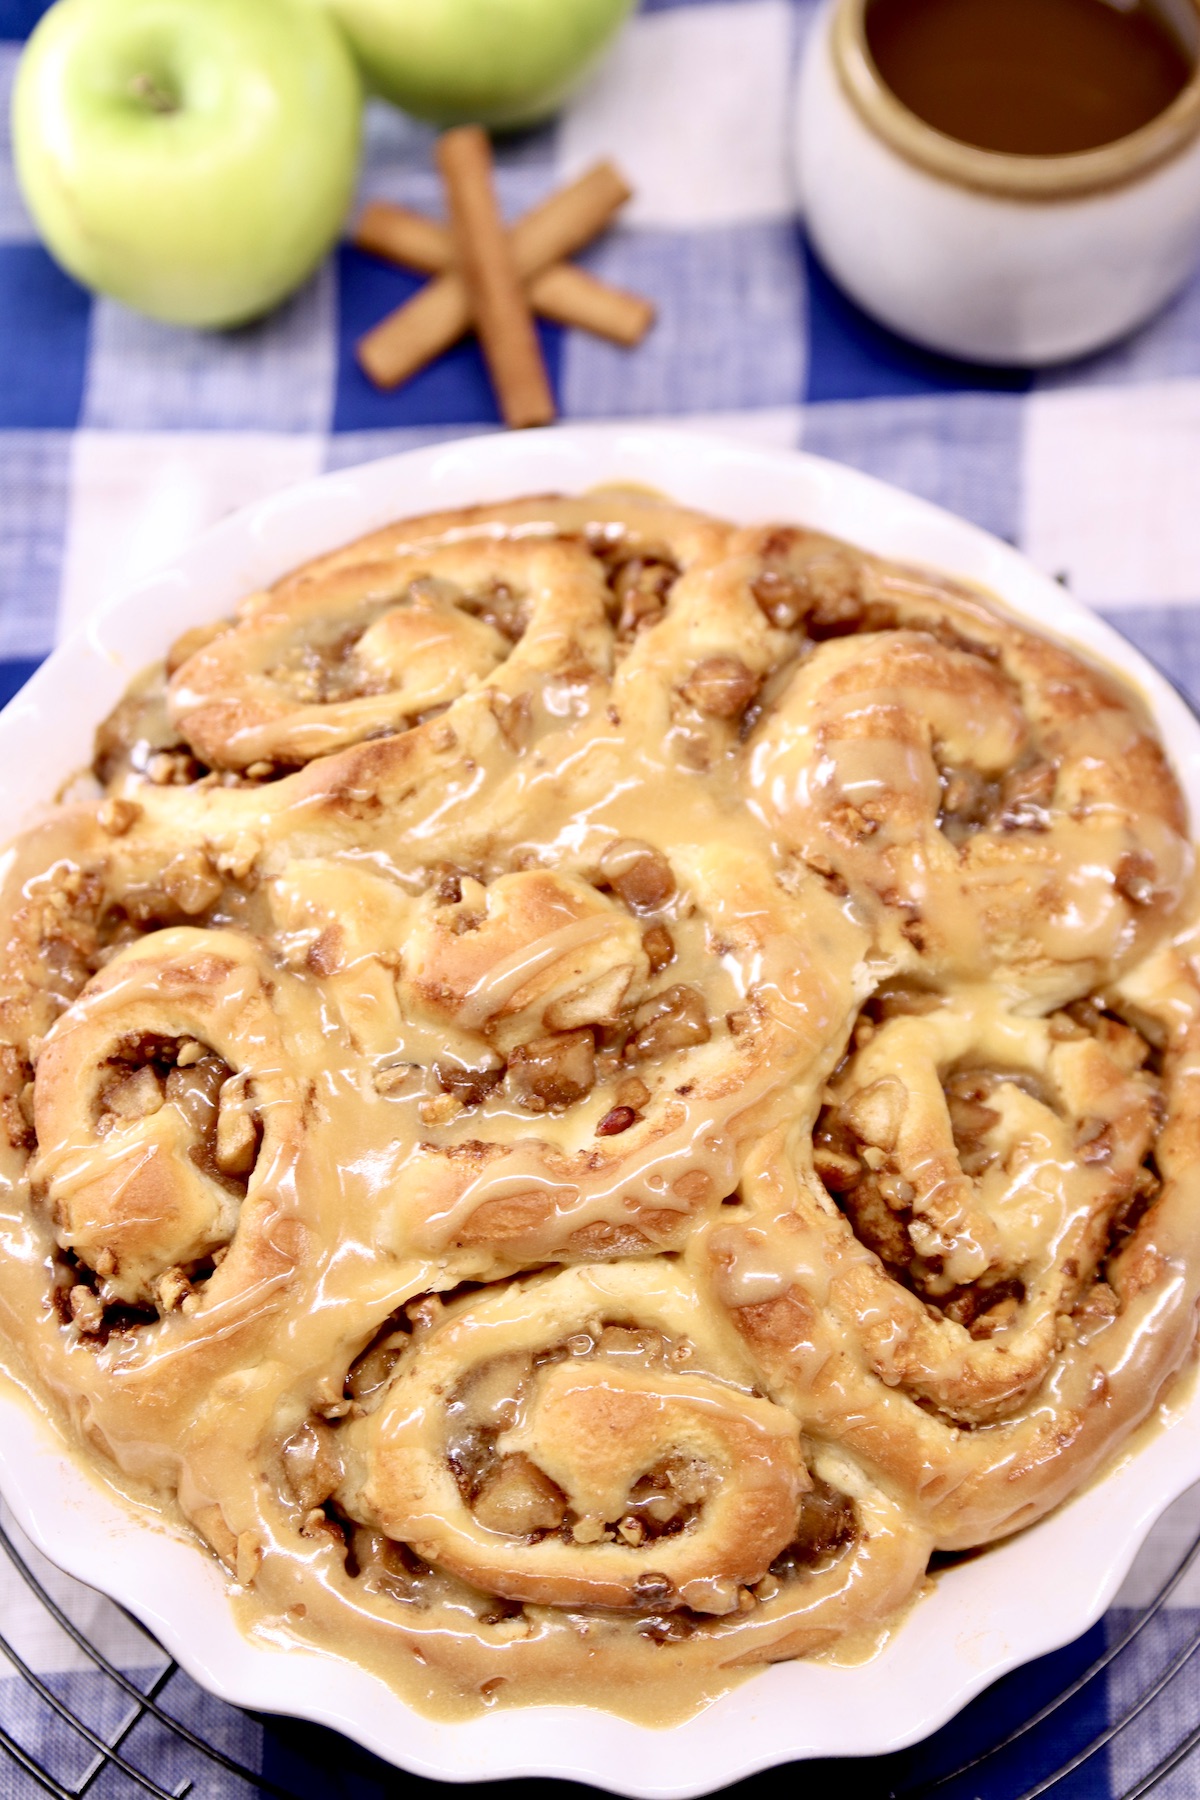 cinnamon rolls in a pie plate, apples, cinnamon sticks and cup of coffee in background